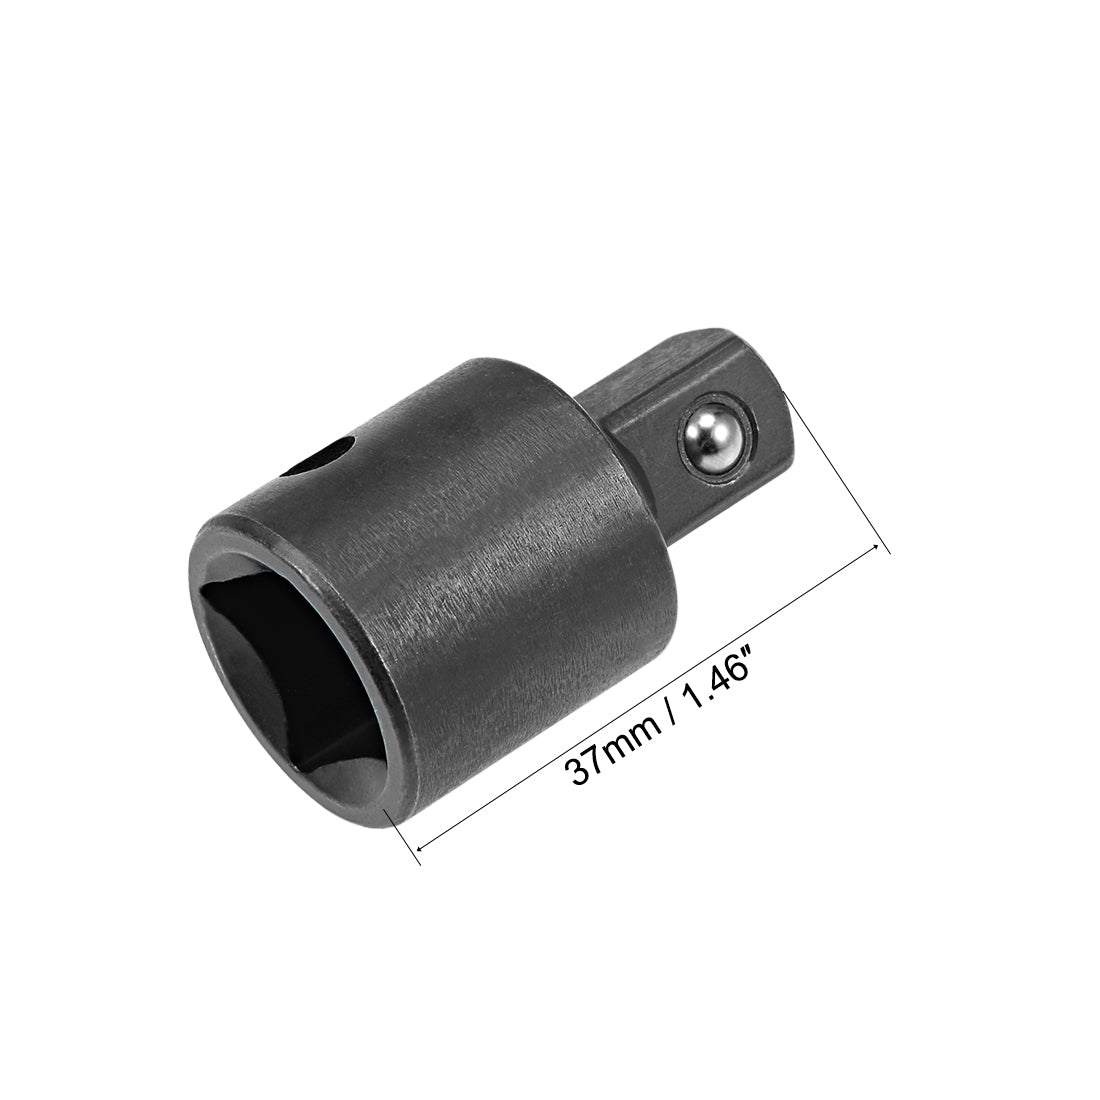 uxcell Uxcell 1/2 Inch Drive (F) x 3/8 Inch (M) Socket Reducer, Female to Male, Cr-V (Black)